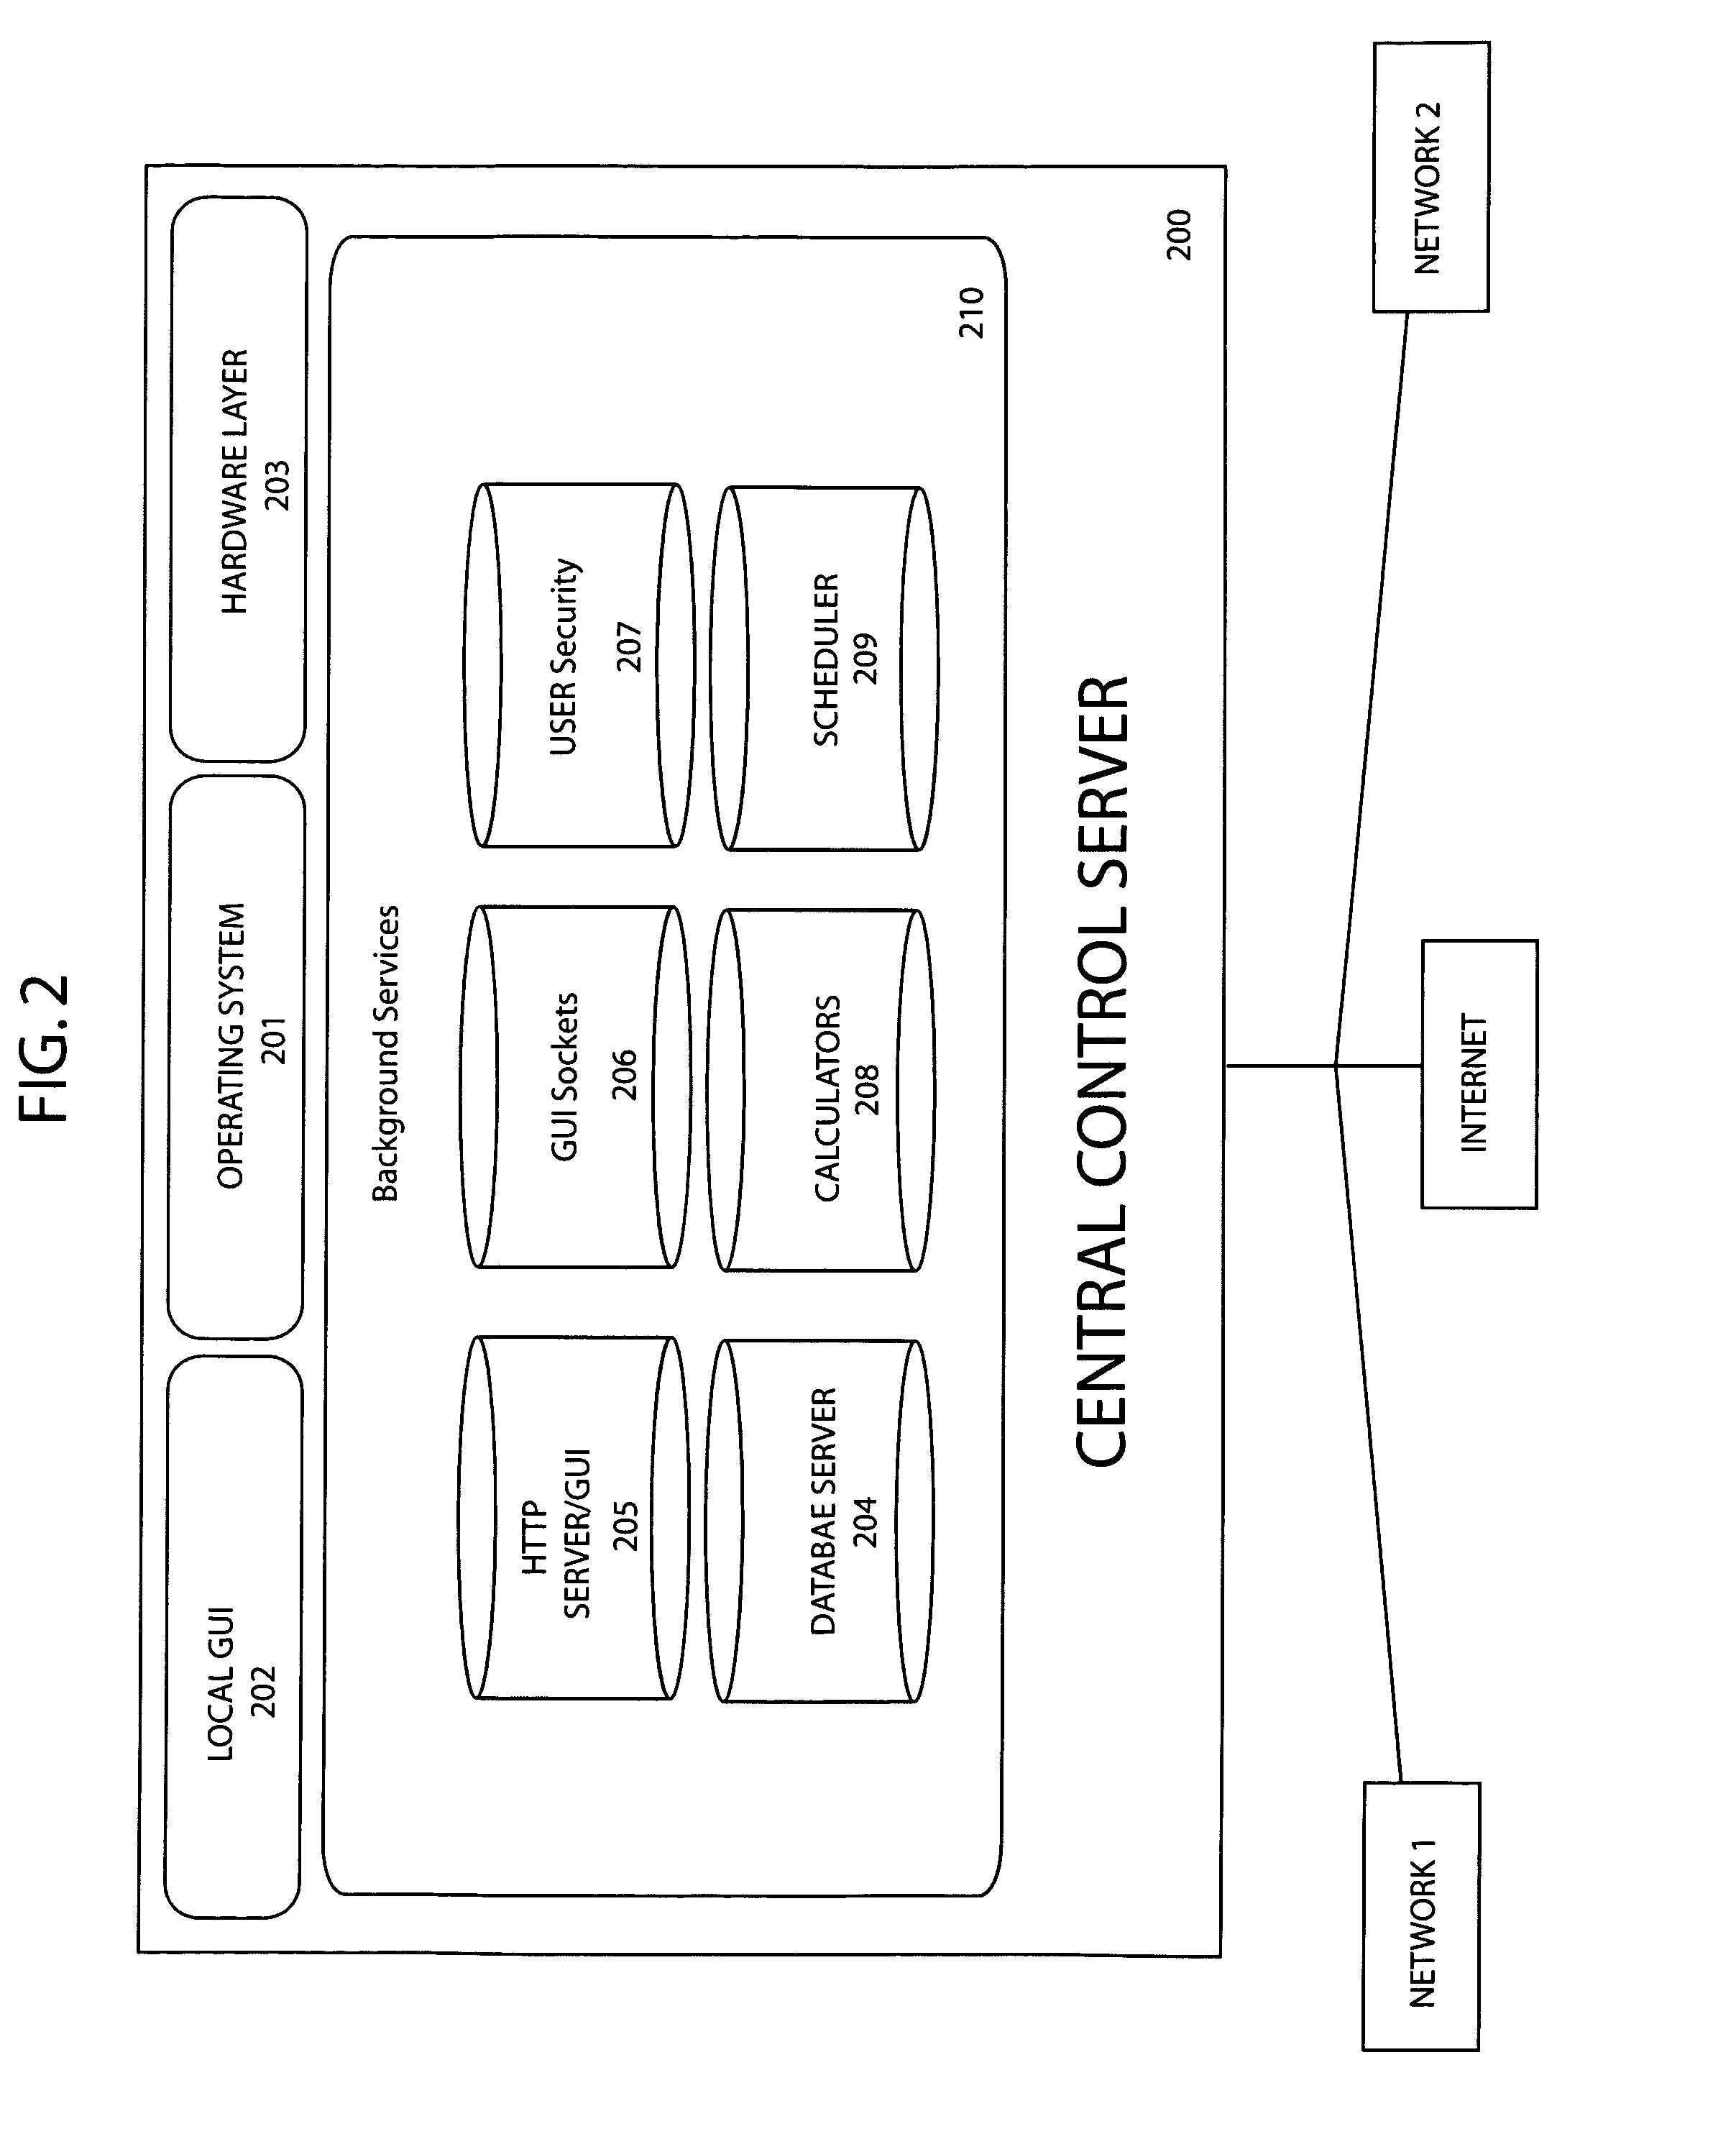 Wireless irrigation control server for monitoring and controlling a field module matrix